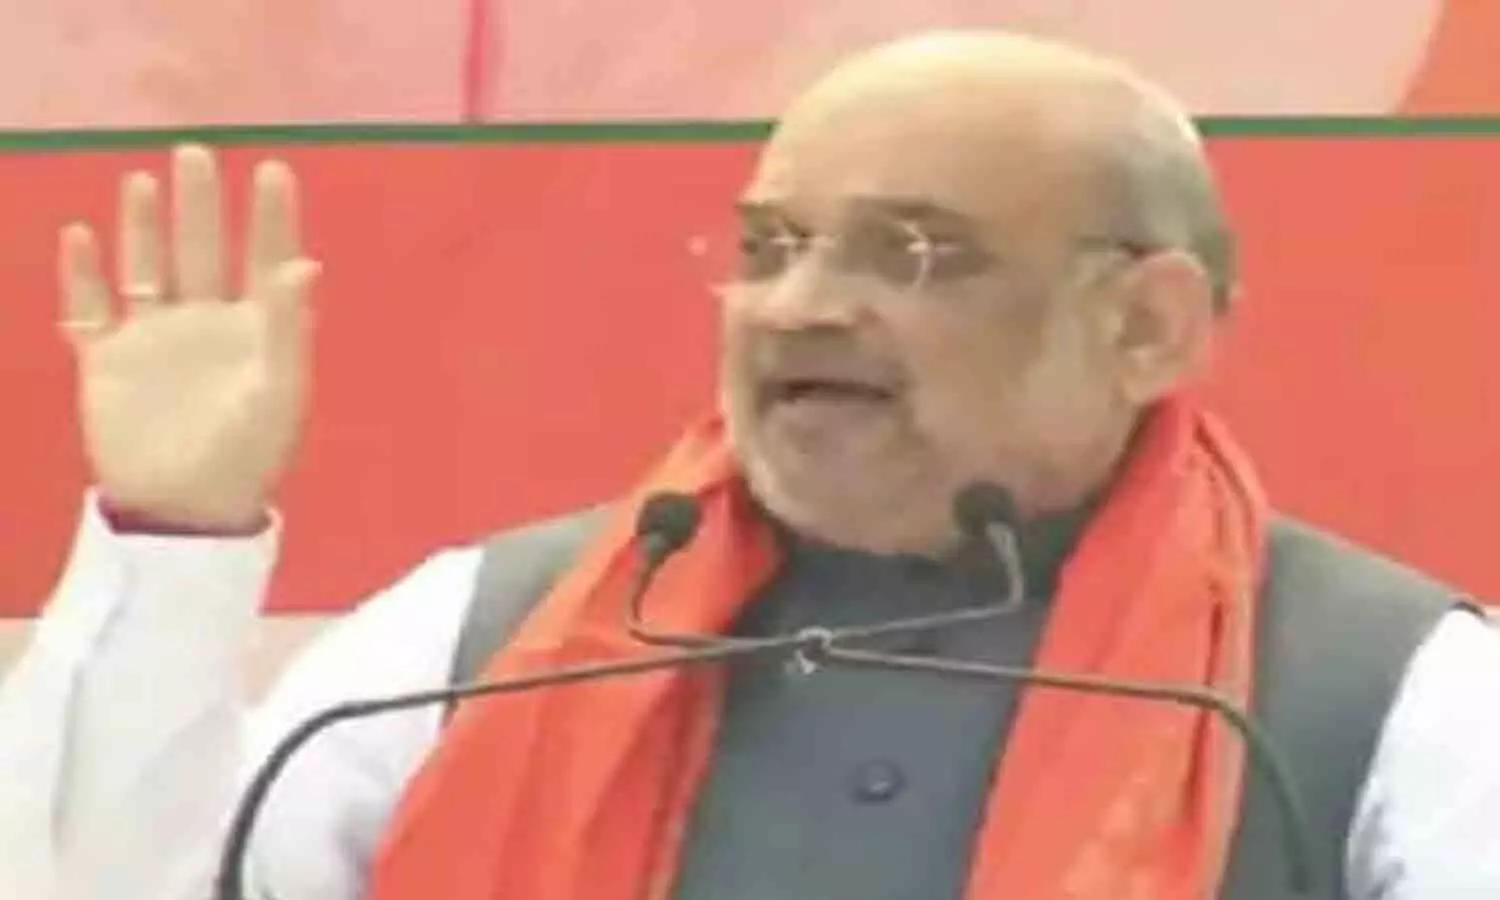 UP Election 2022: Amit Shahs challenge in Malhani, said- pressing the lotus button on March 7 will be in mafia jail on March 11